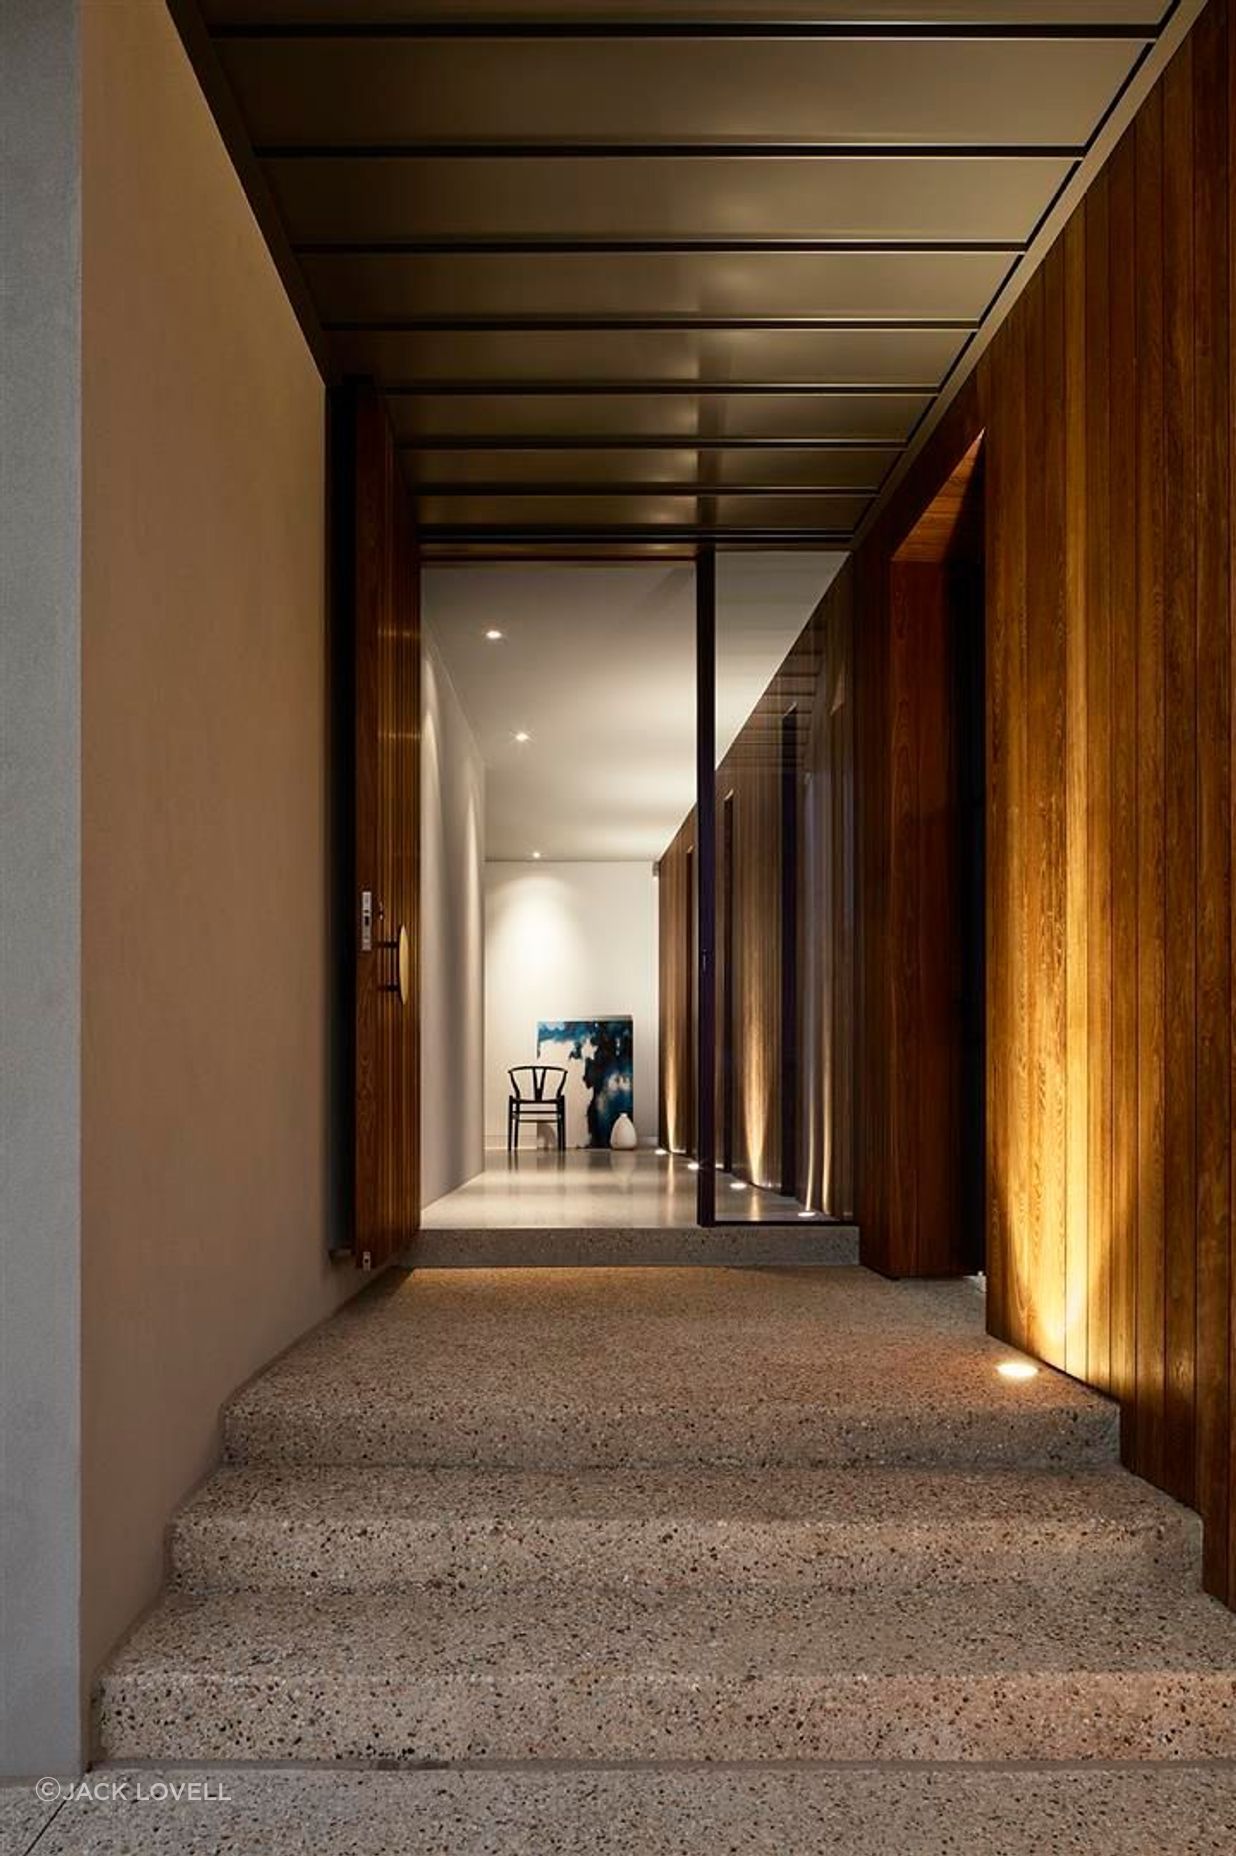 Up-lit timber walls lead guests into the darker, moodier, lower floor.